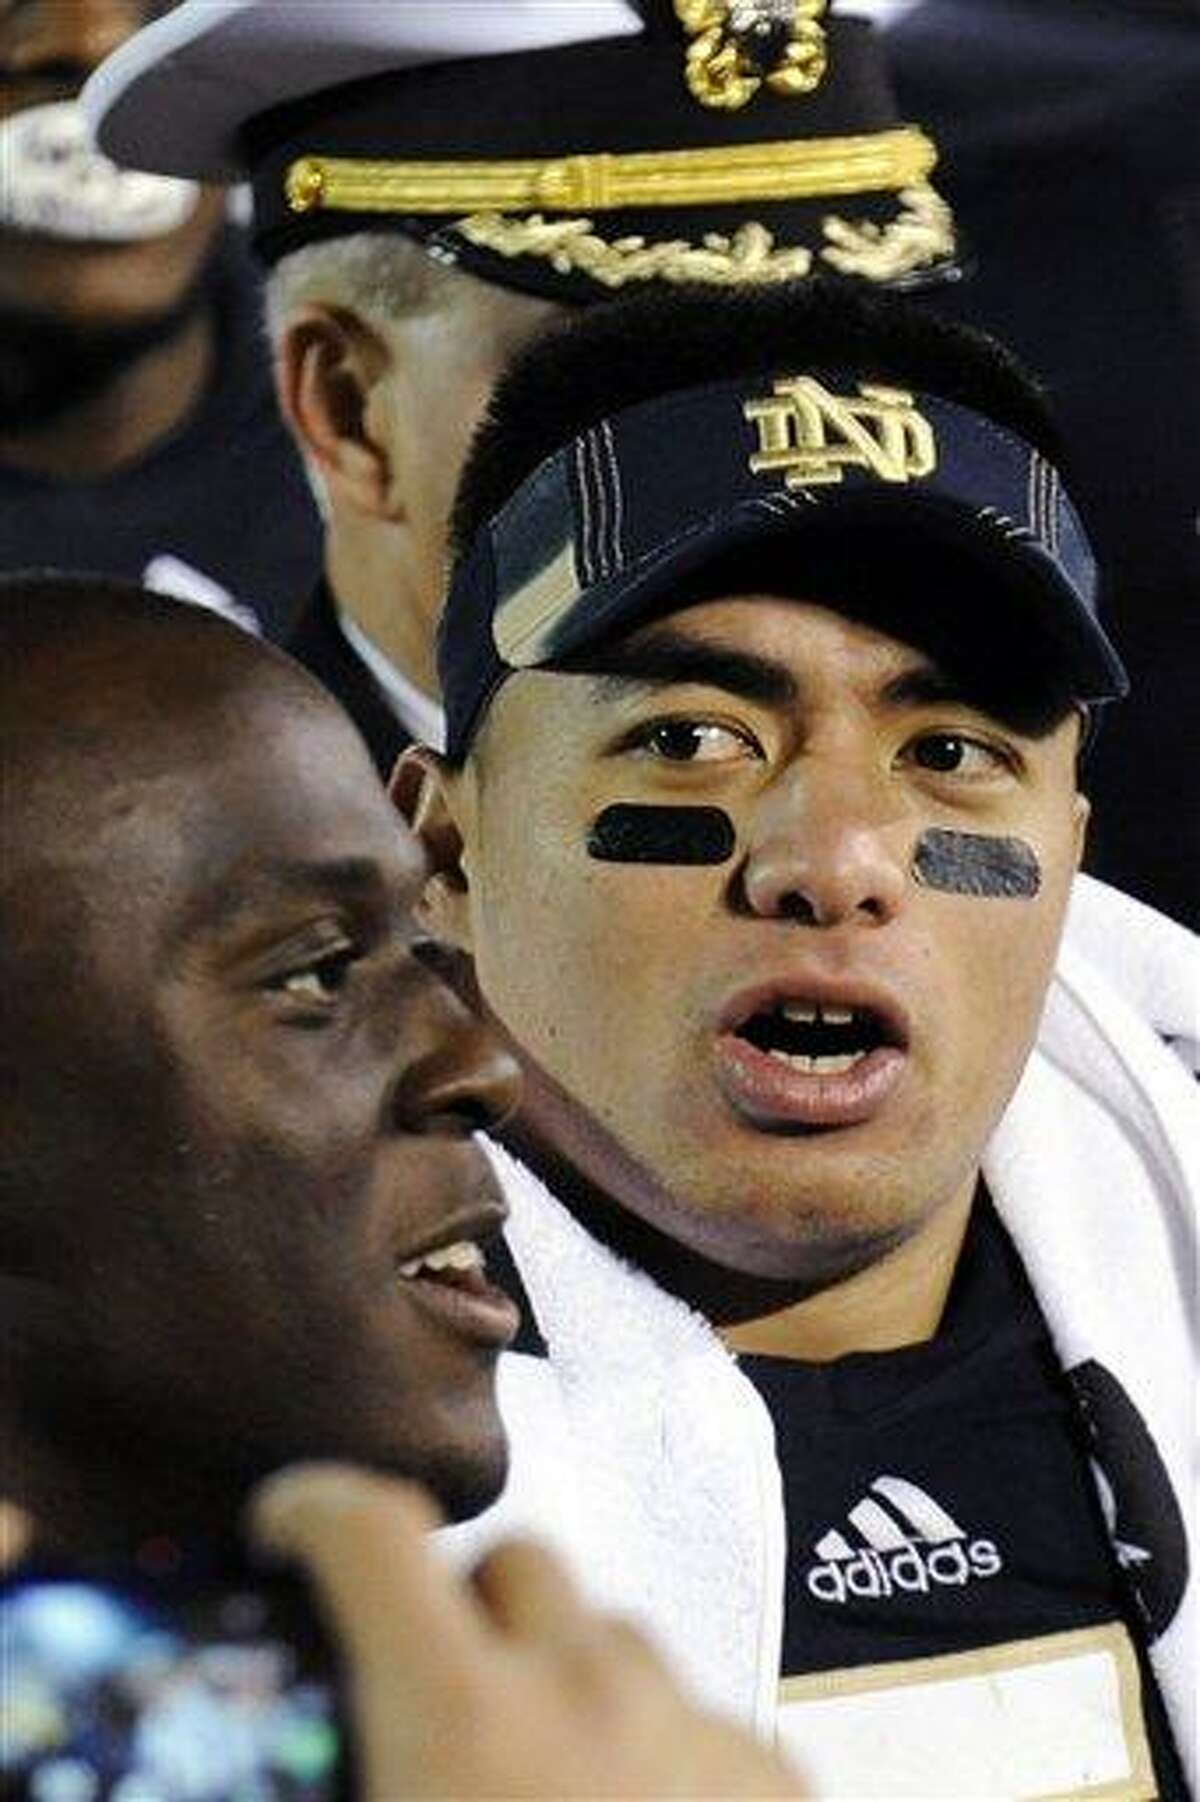 In this Nov. 17, 2012, photo, Notre Dame linebacker Manti Te'o sings the alma mater following their NCAA college football game against Stanford in South Bend, Ind. A story that Te'o's girlfriend had died of leukemia _ a loss he said inspired him to help lead the Irish to the BCS championship game _ was dismissed by the university Wednesday, Jan. 16, 2013, as a hoax perpetrated against the linebacker. (AP Photo/Joe Raymond)